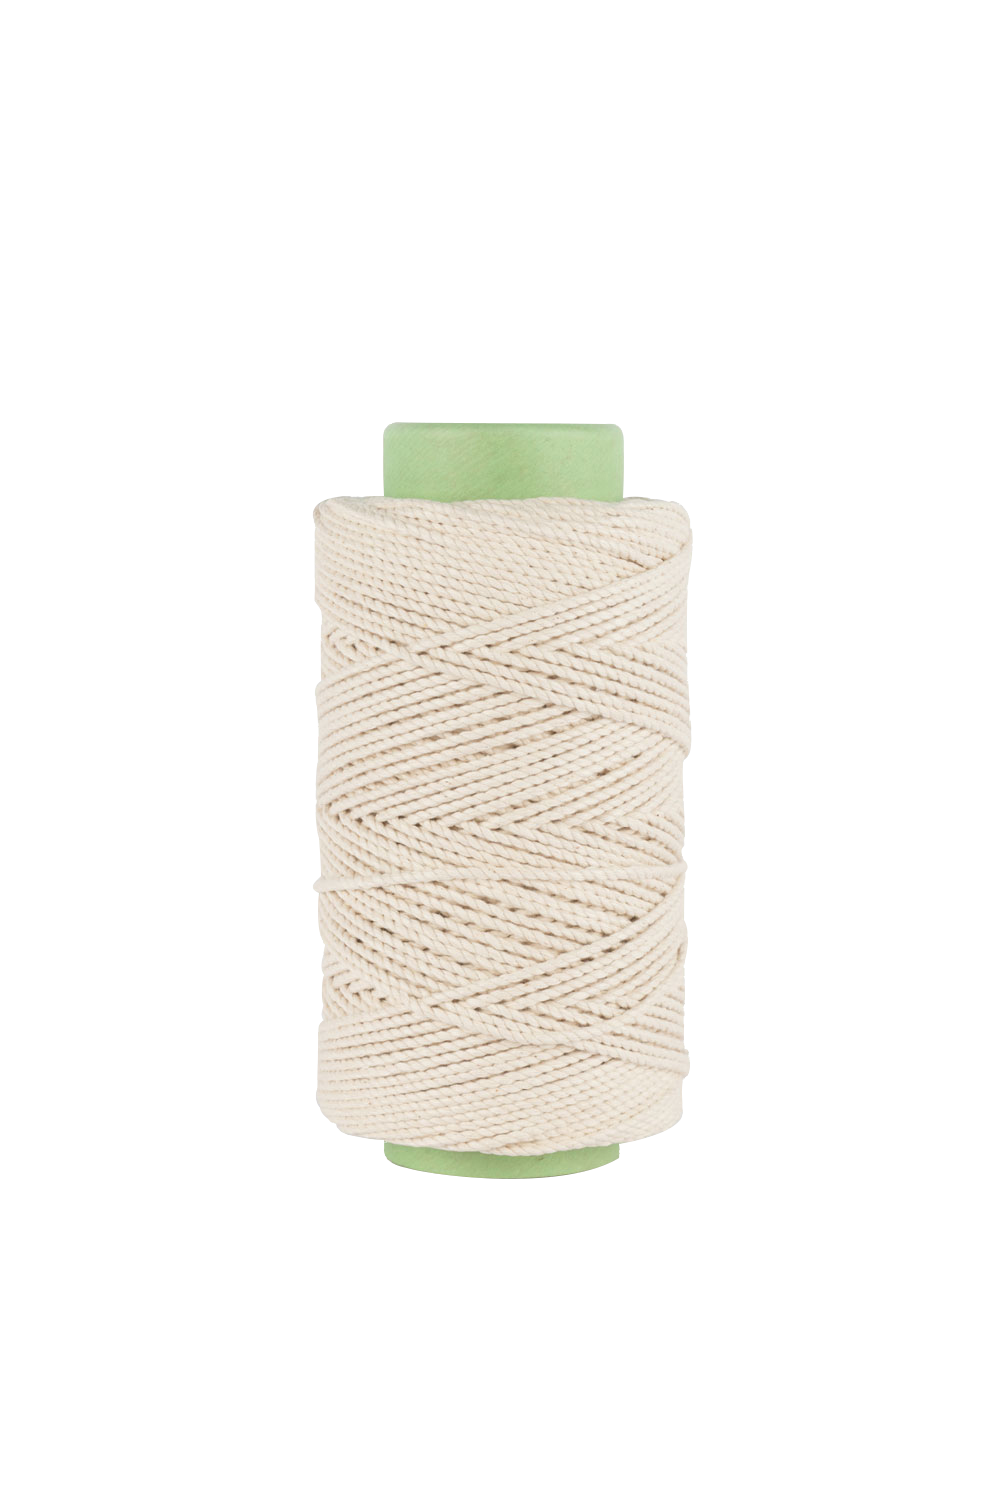 3mm Cotton Rope 500 Feet -Use for DIY Jewelry, Knitting, Gift Wrap and More! Light Pink by Modern Macramé